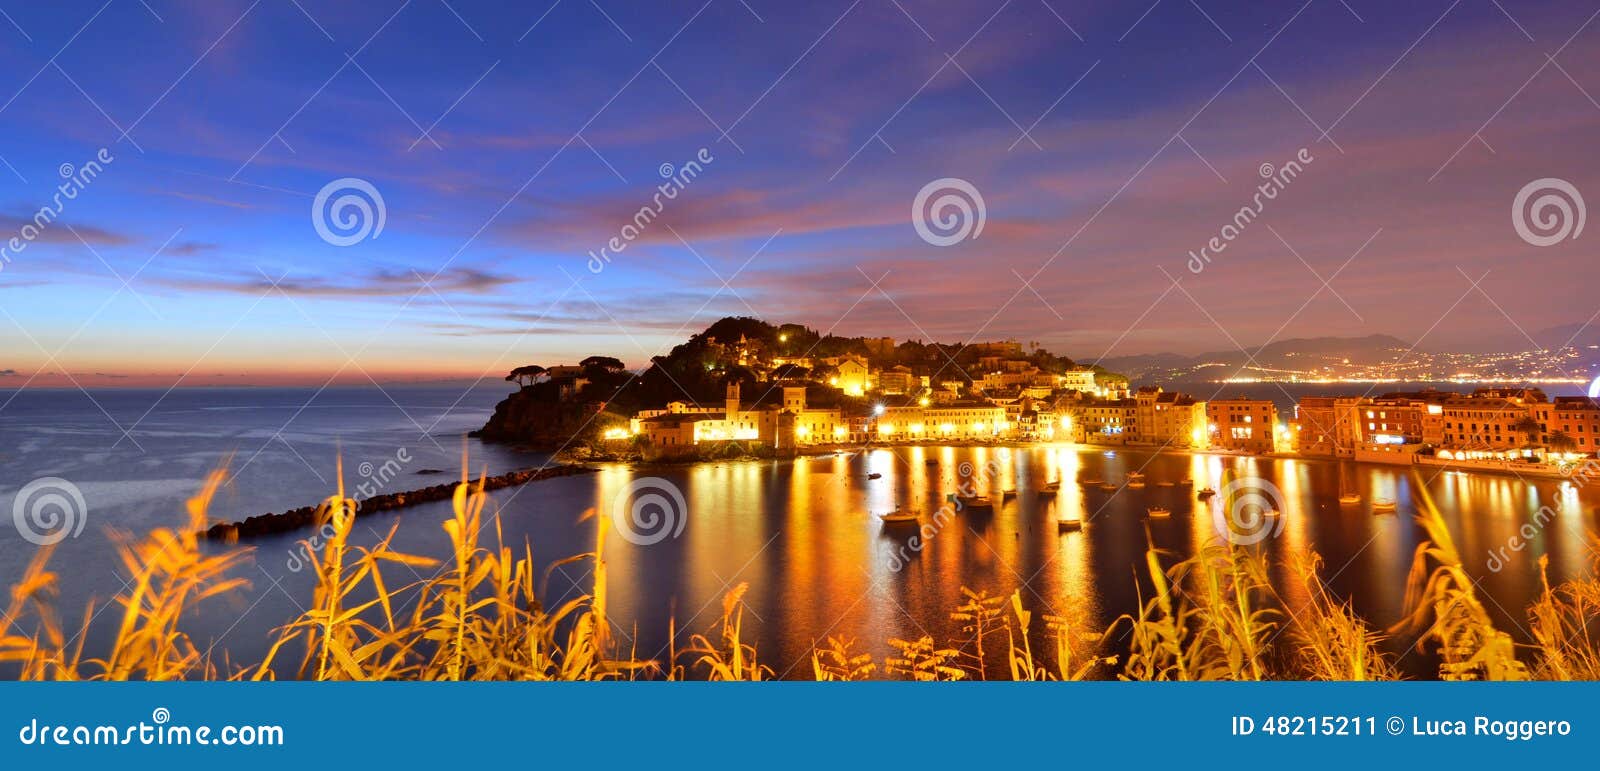 sestri levante after the sunset. liguria, italy